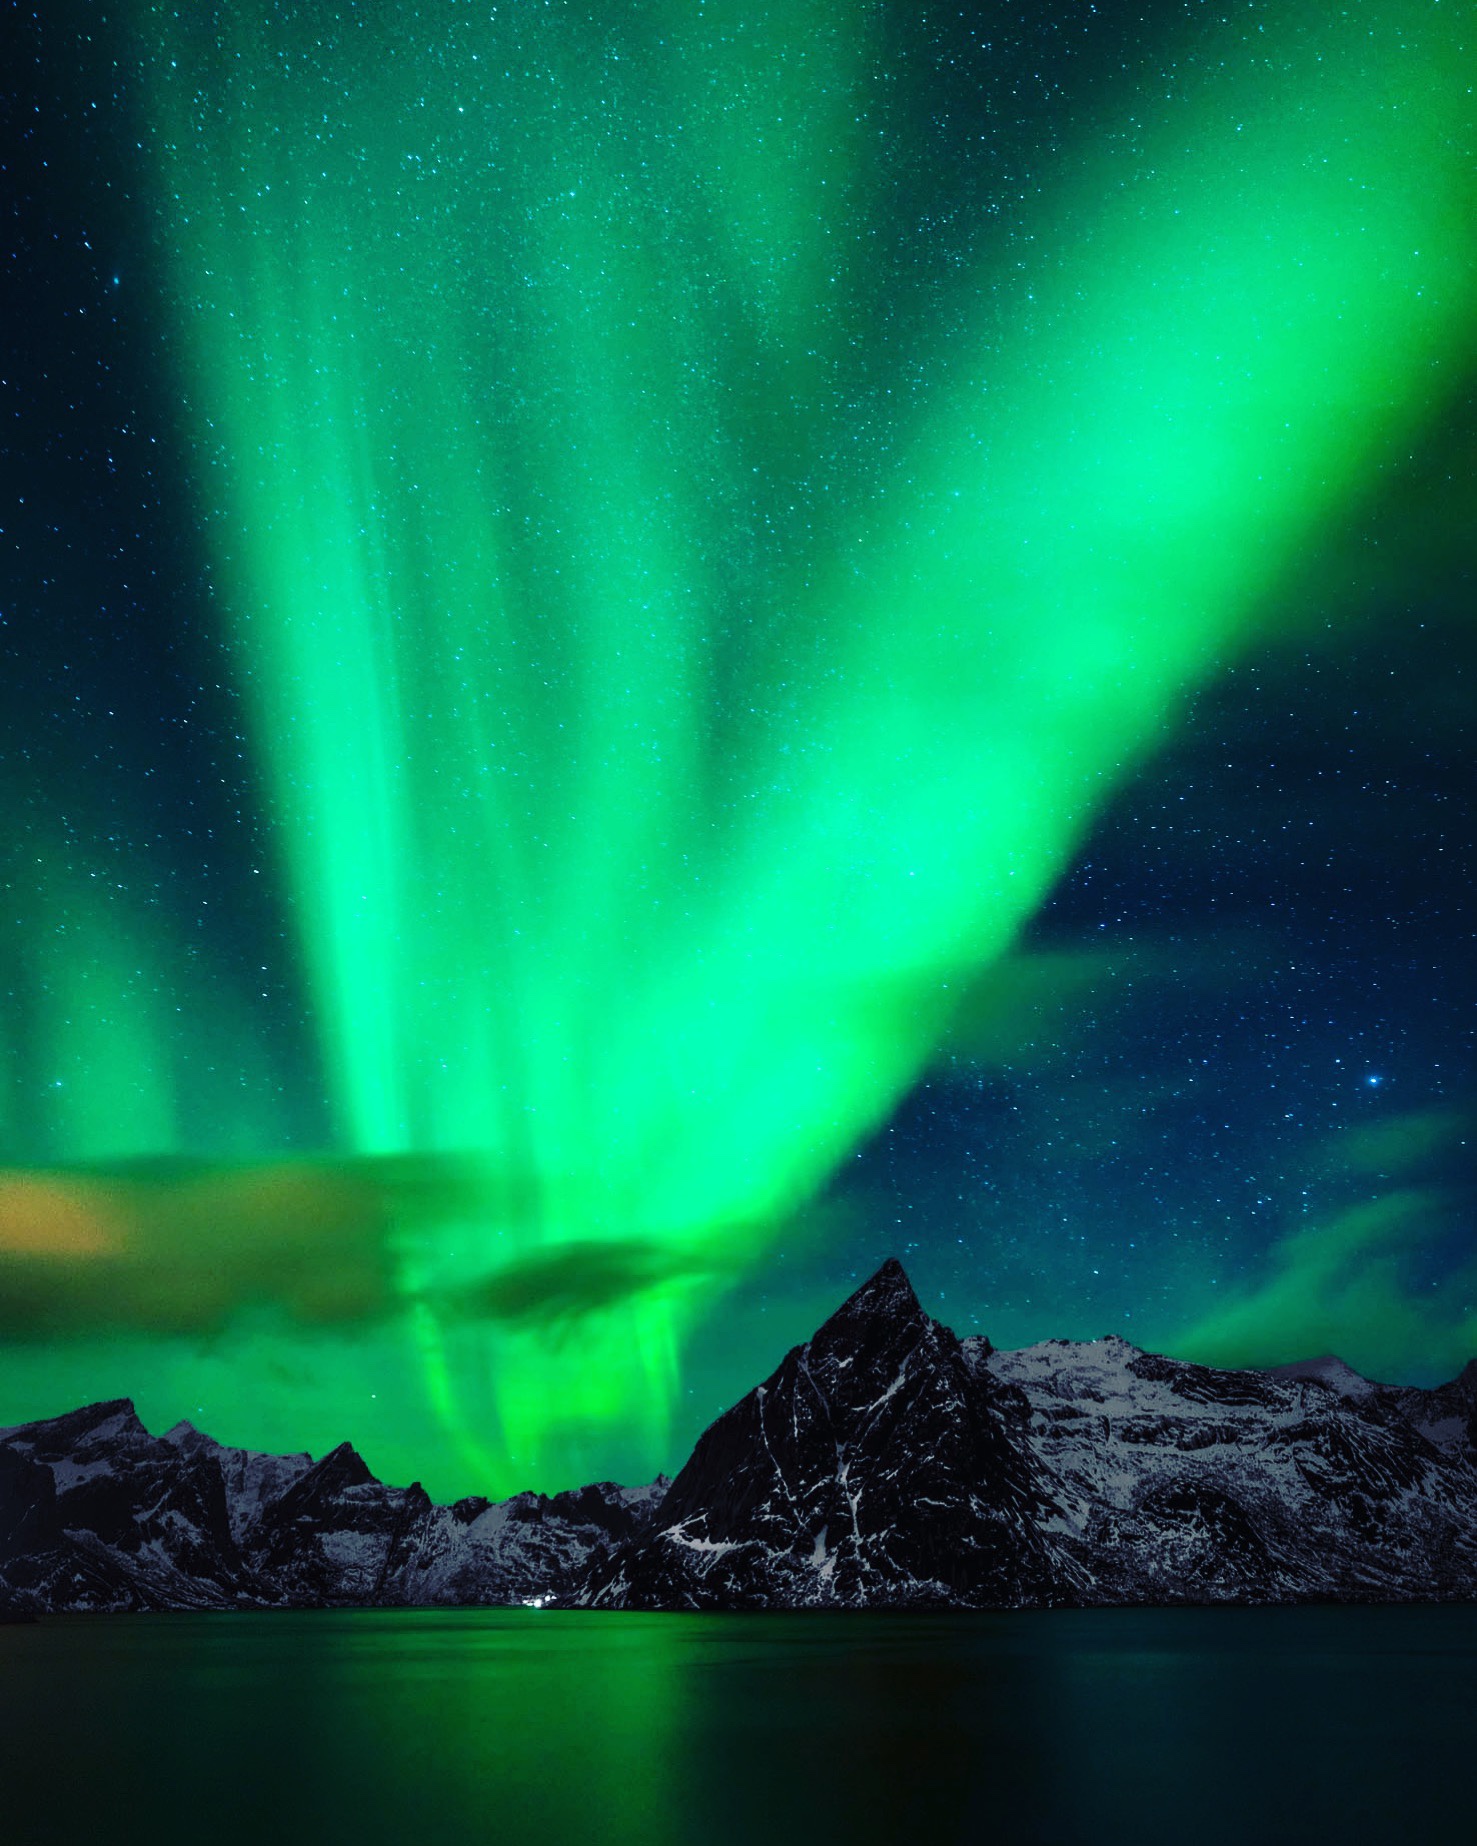 green lights in the sky over mountains